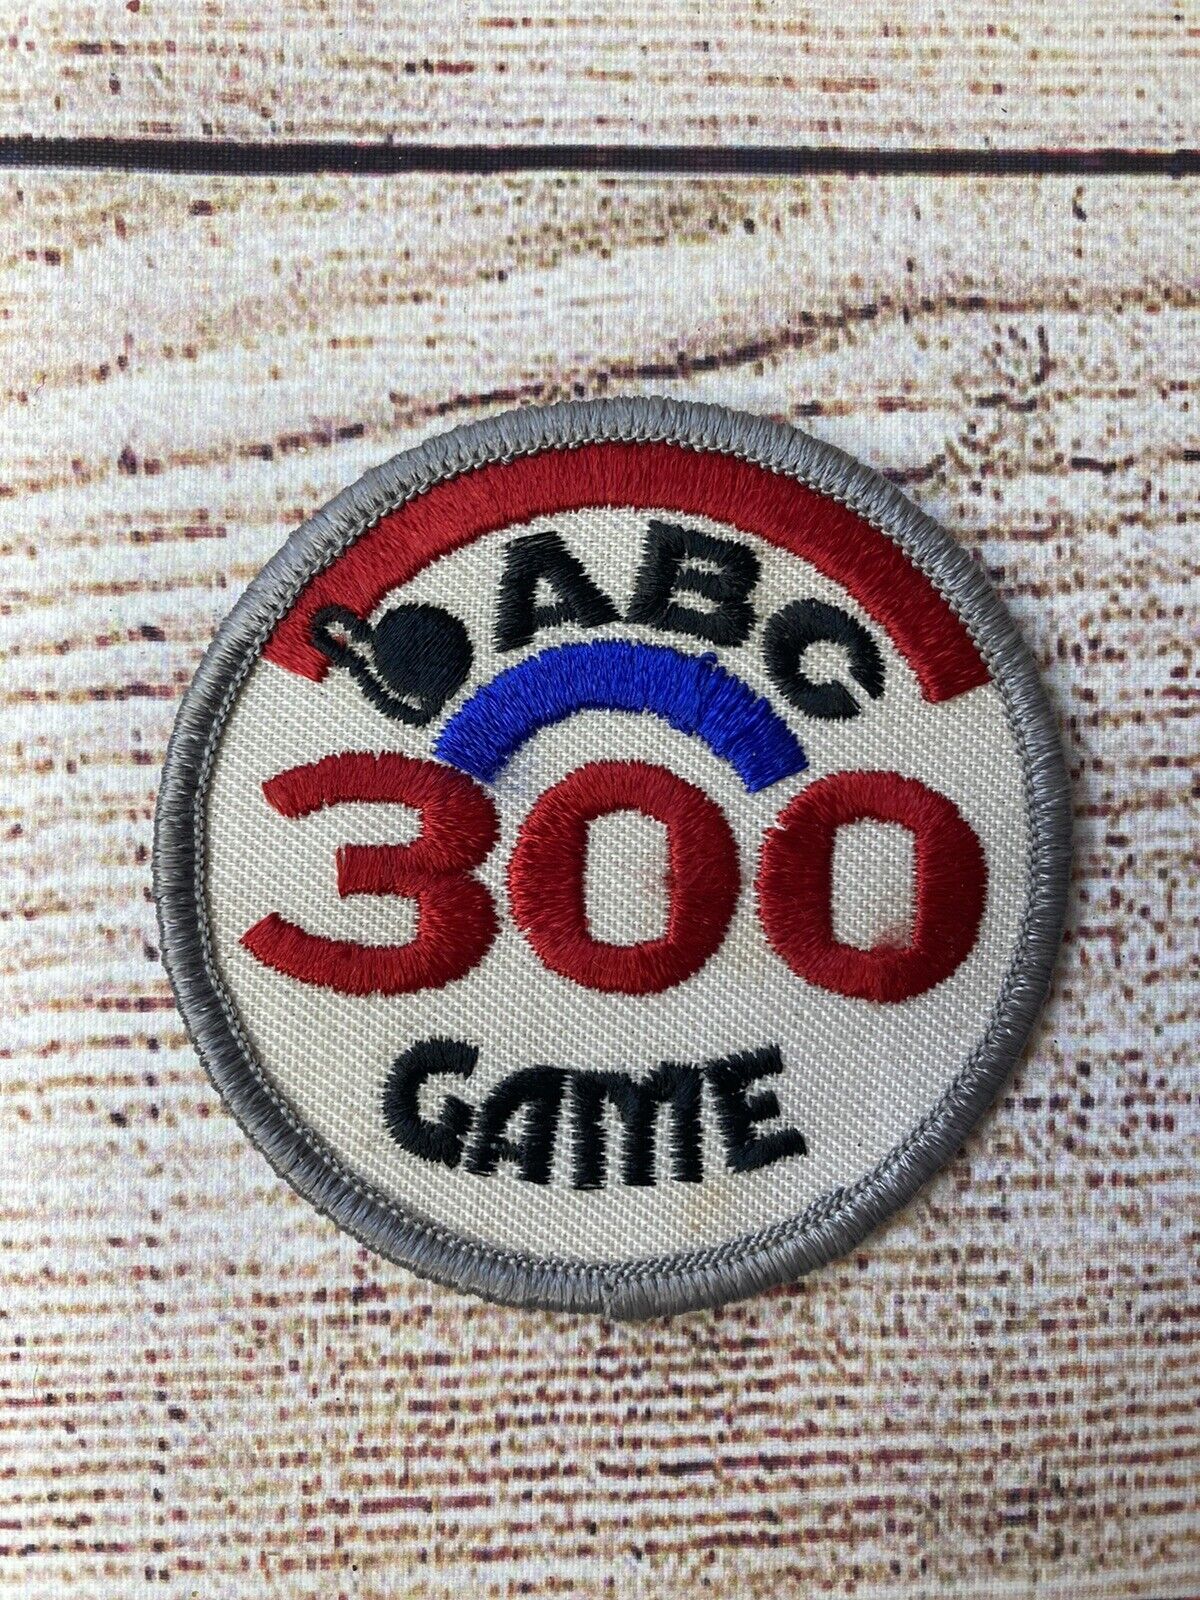 Rare Vtg 300 Game Patch New mail order American Quality inspection Bowling Vintage Congress ABC Pe